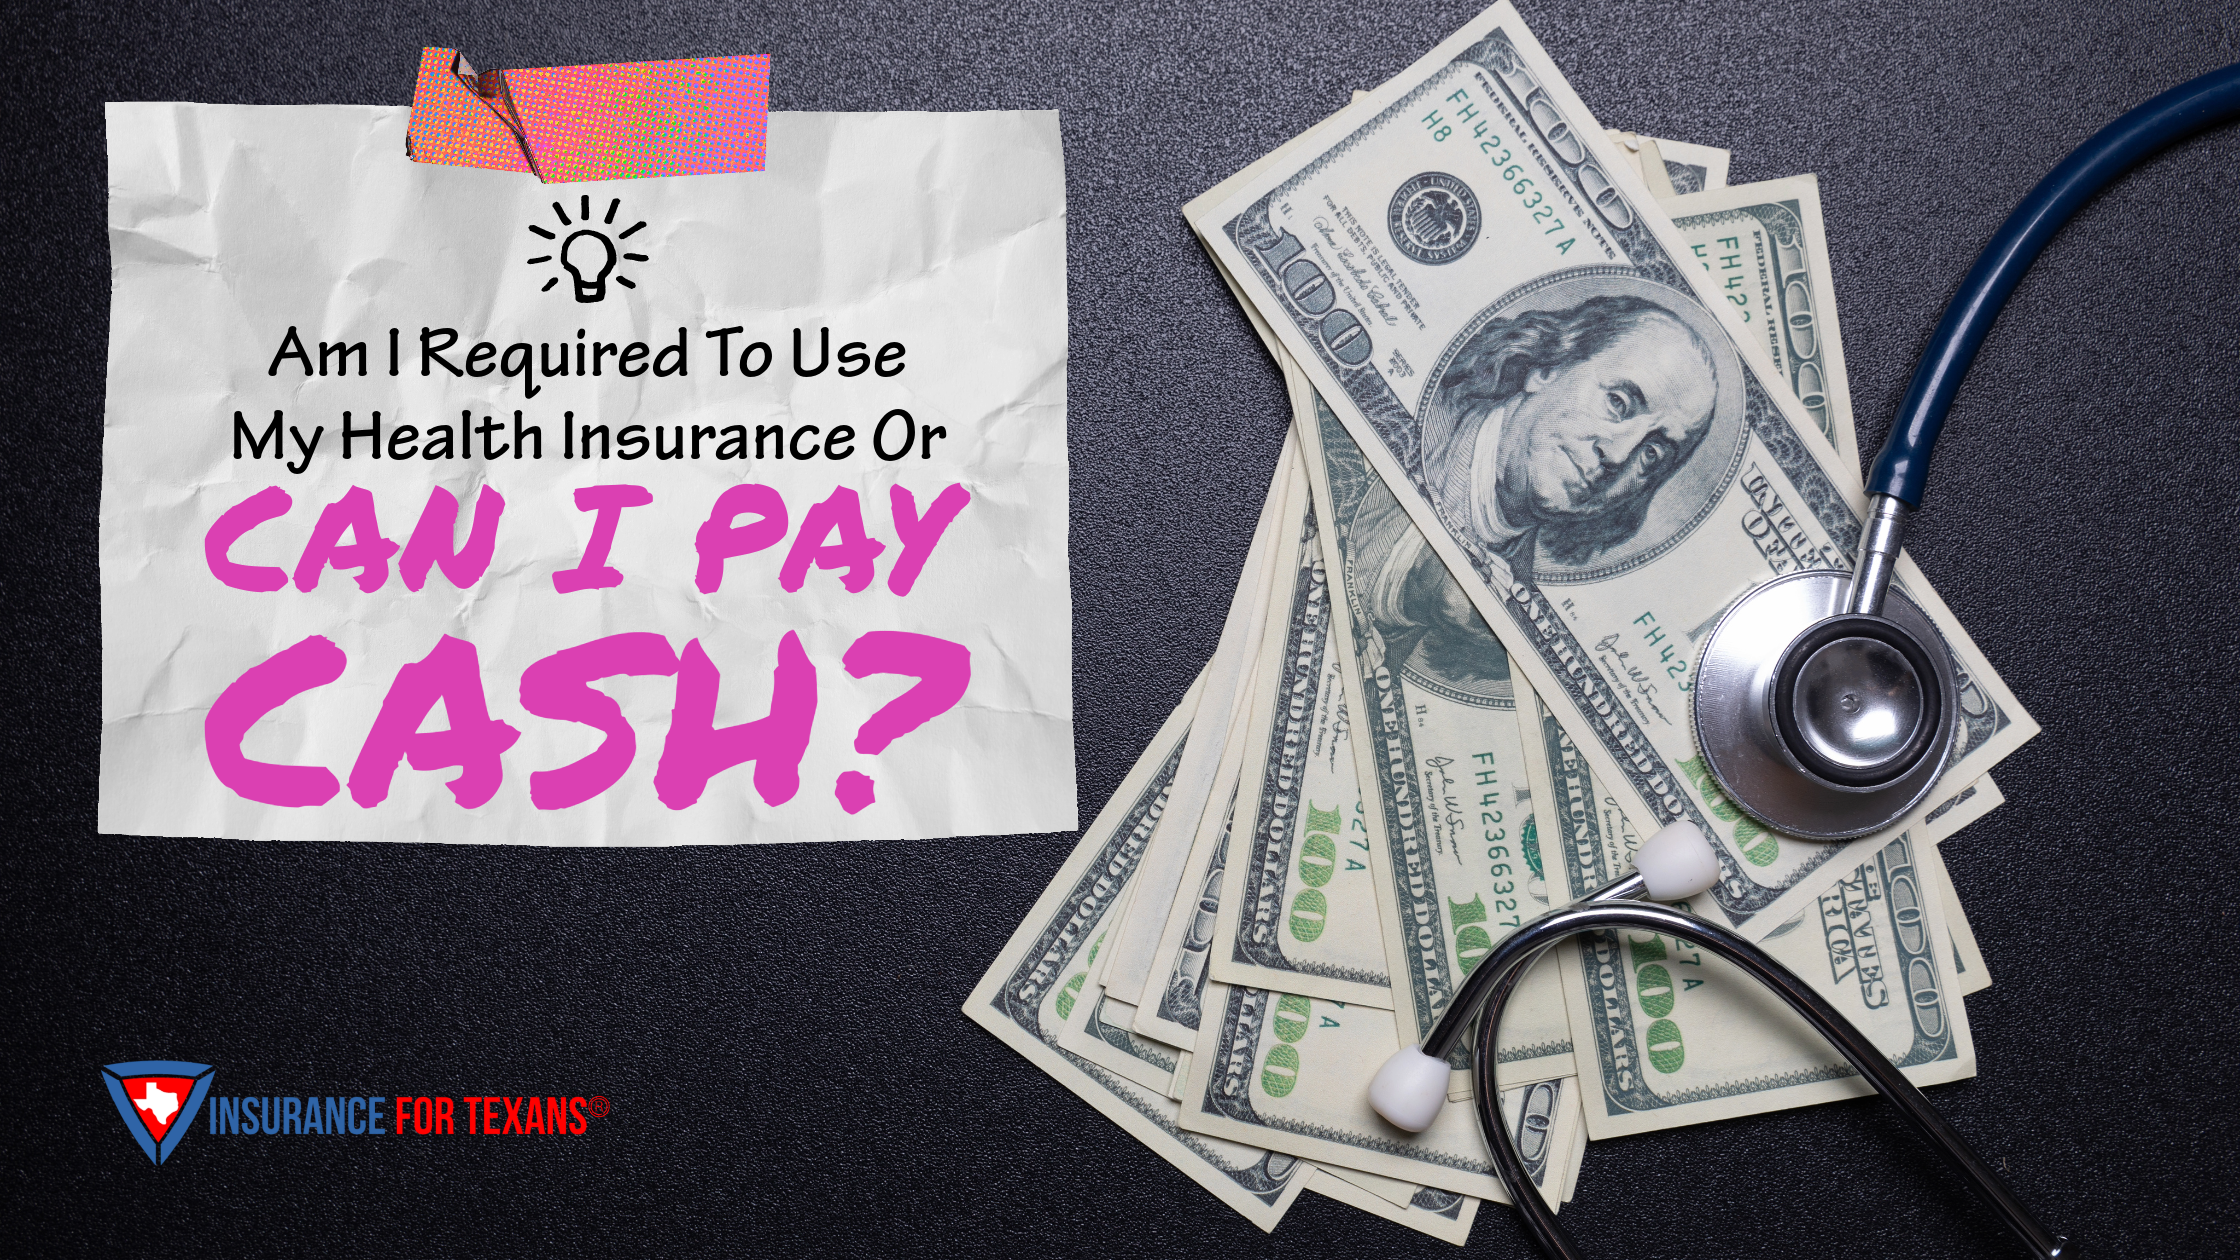 Am I Required To Use My Health Insurance Or Can I Pay Cash?